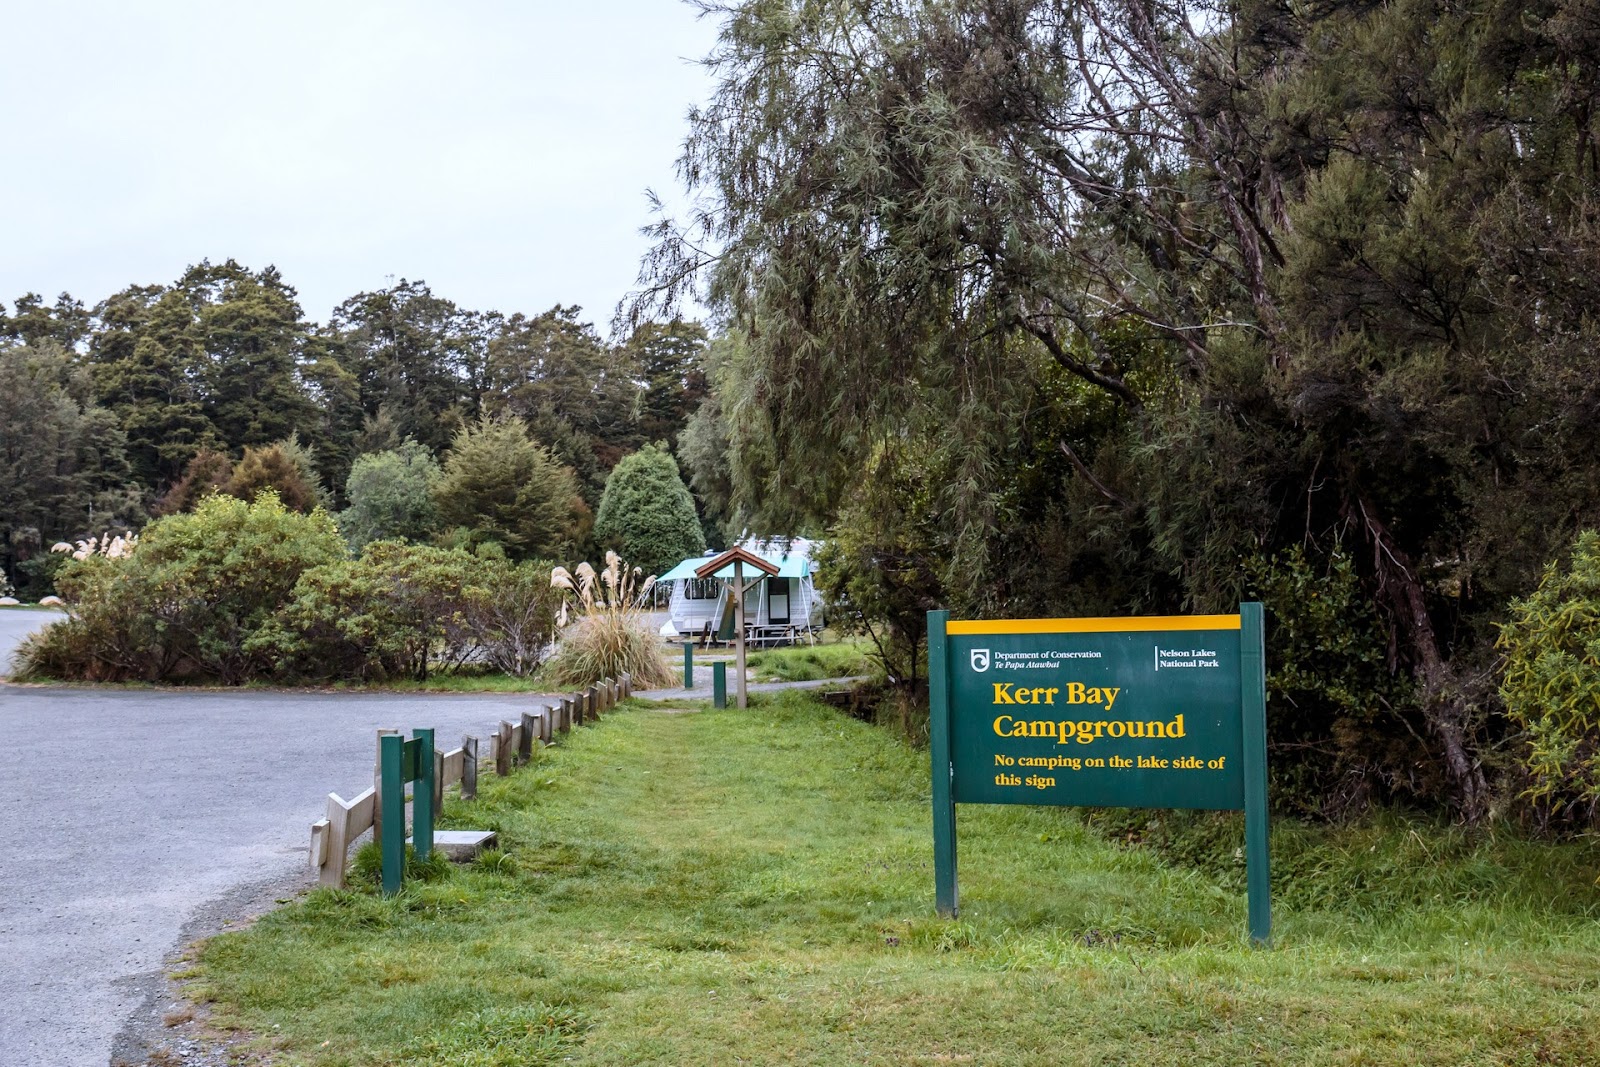 Kerr Bay Campground